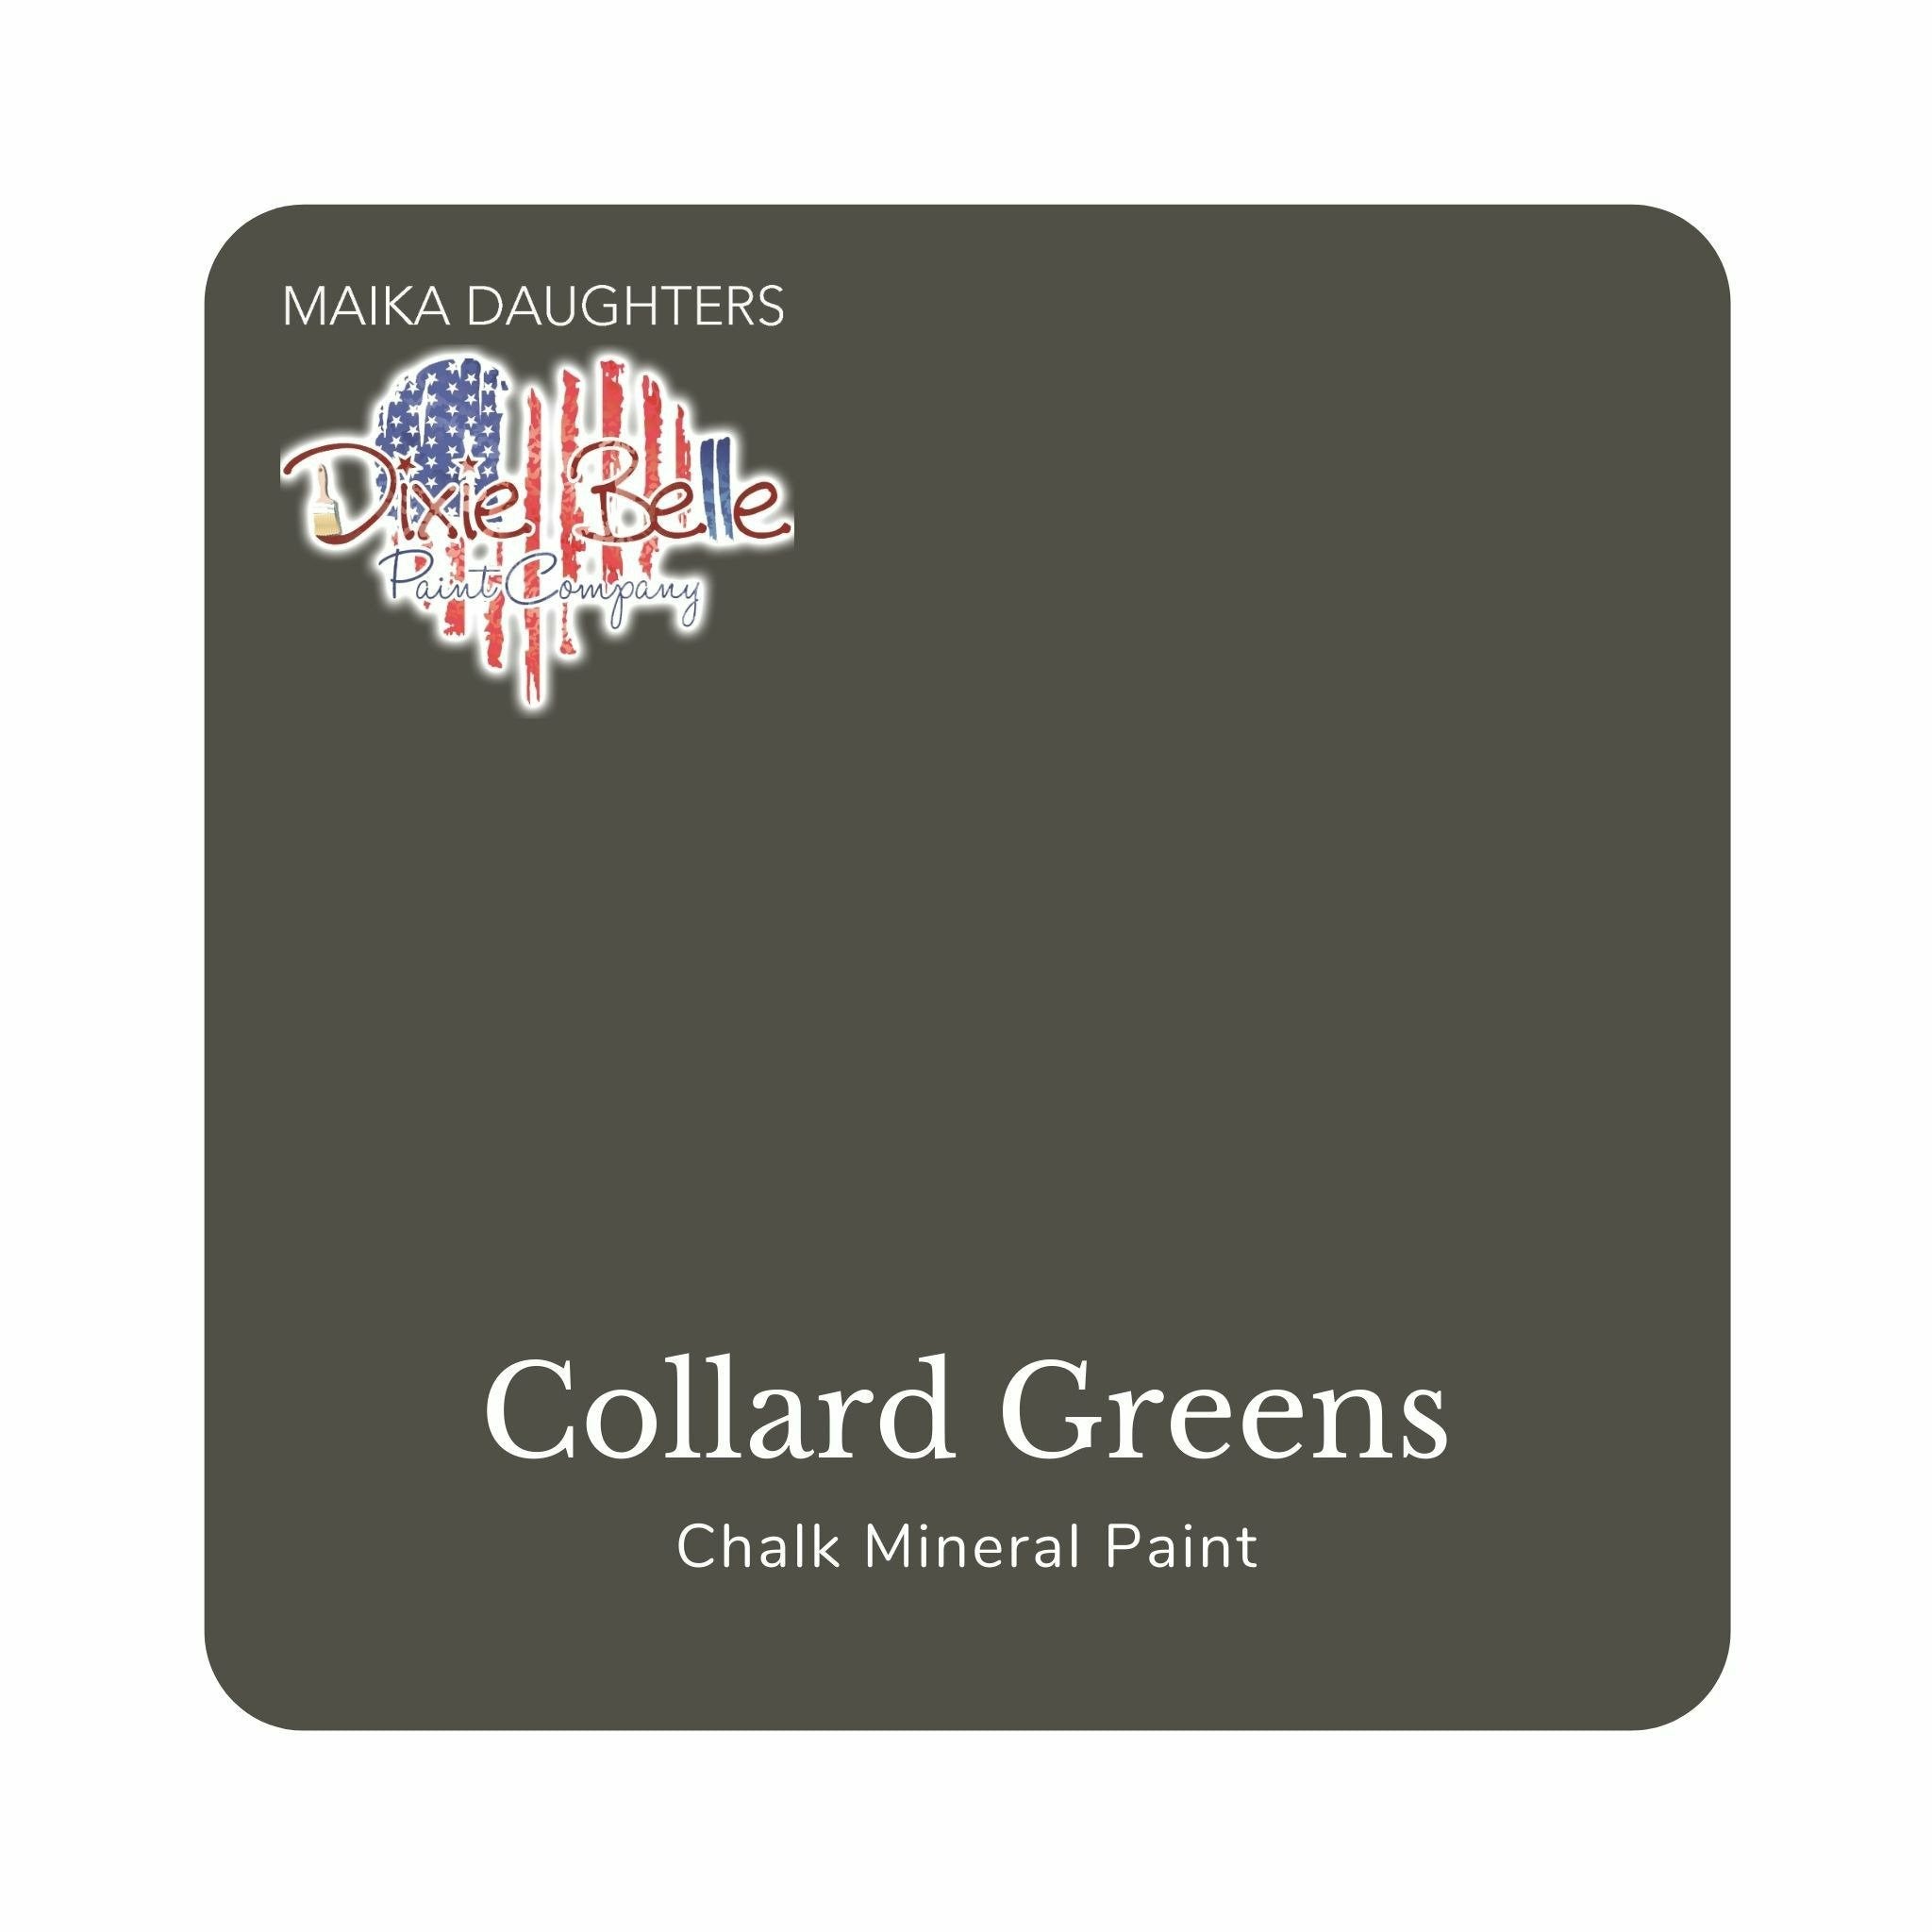 A square swatch card of Dixie Belle Paint Company’s Collard Greens Chalk Mineral Paint is against a white background. This color is a dark olive green.